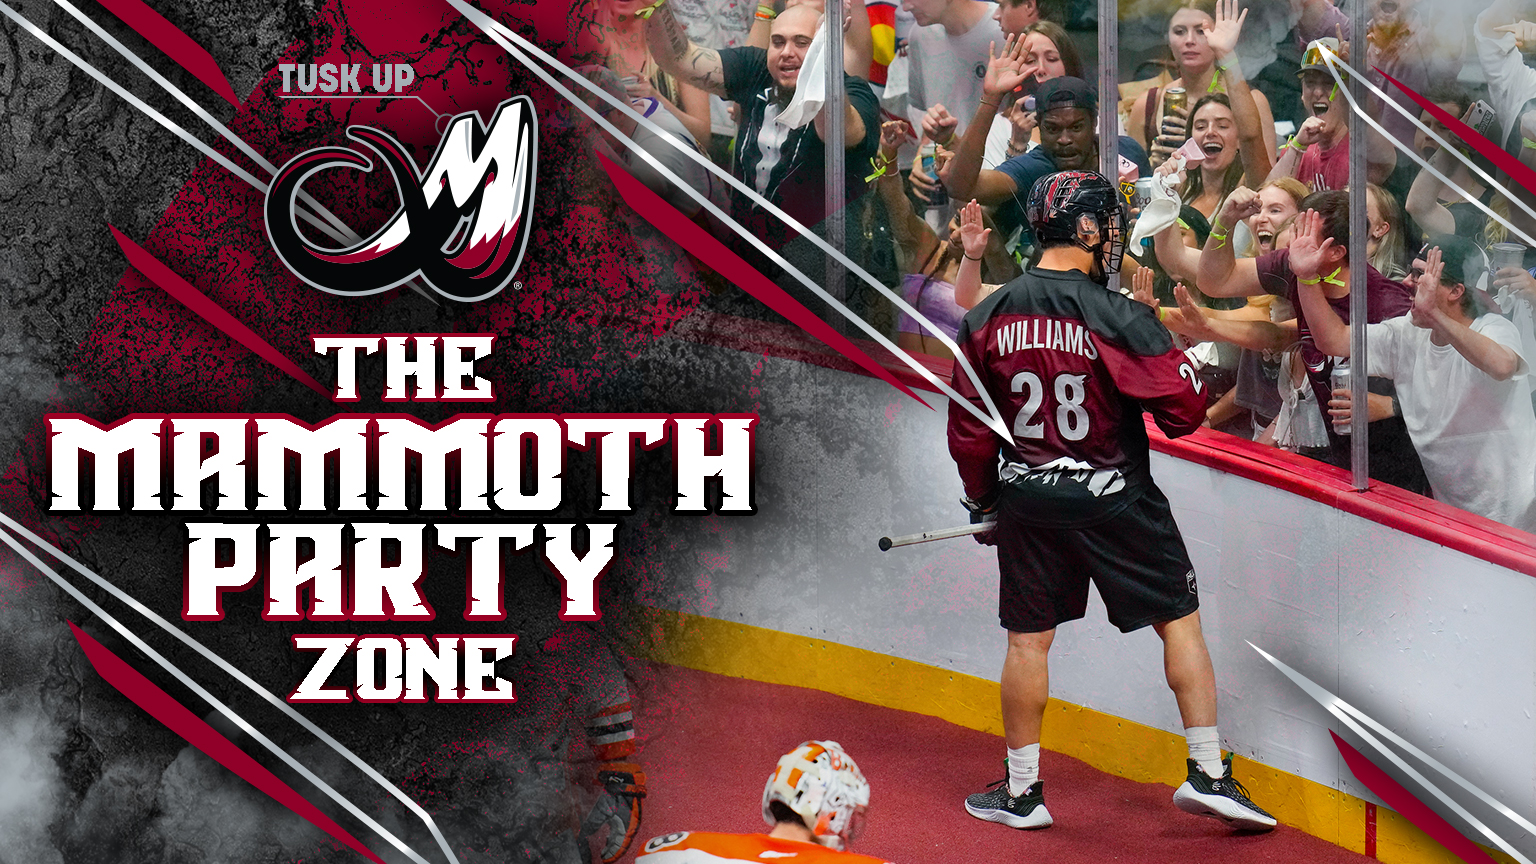 Mammoth Party Zone